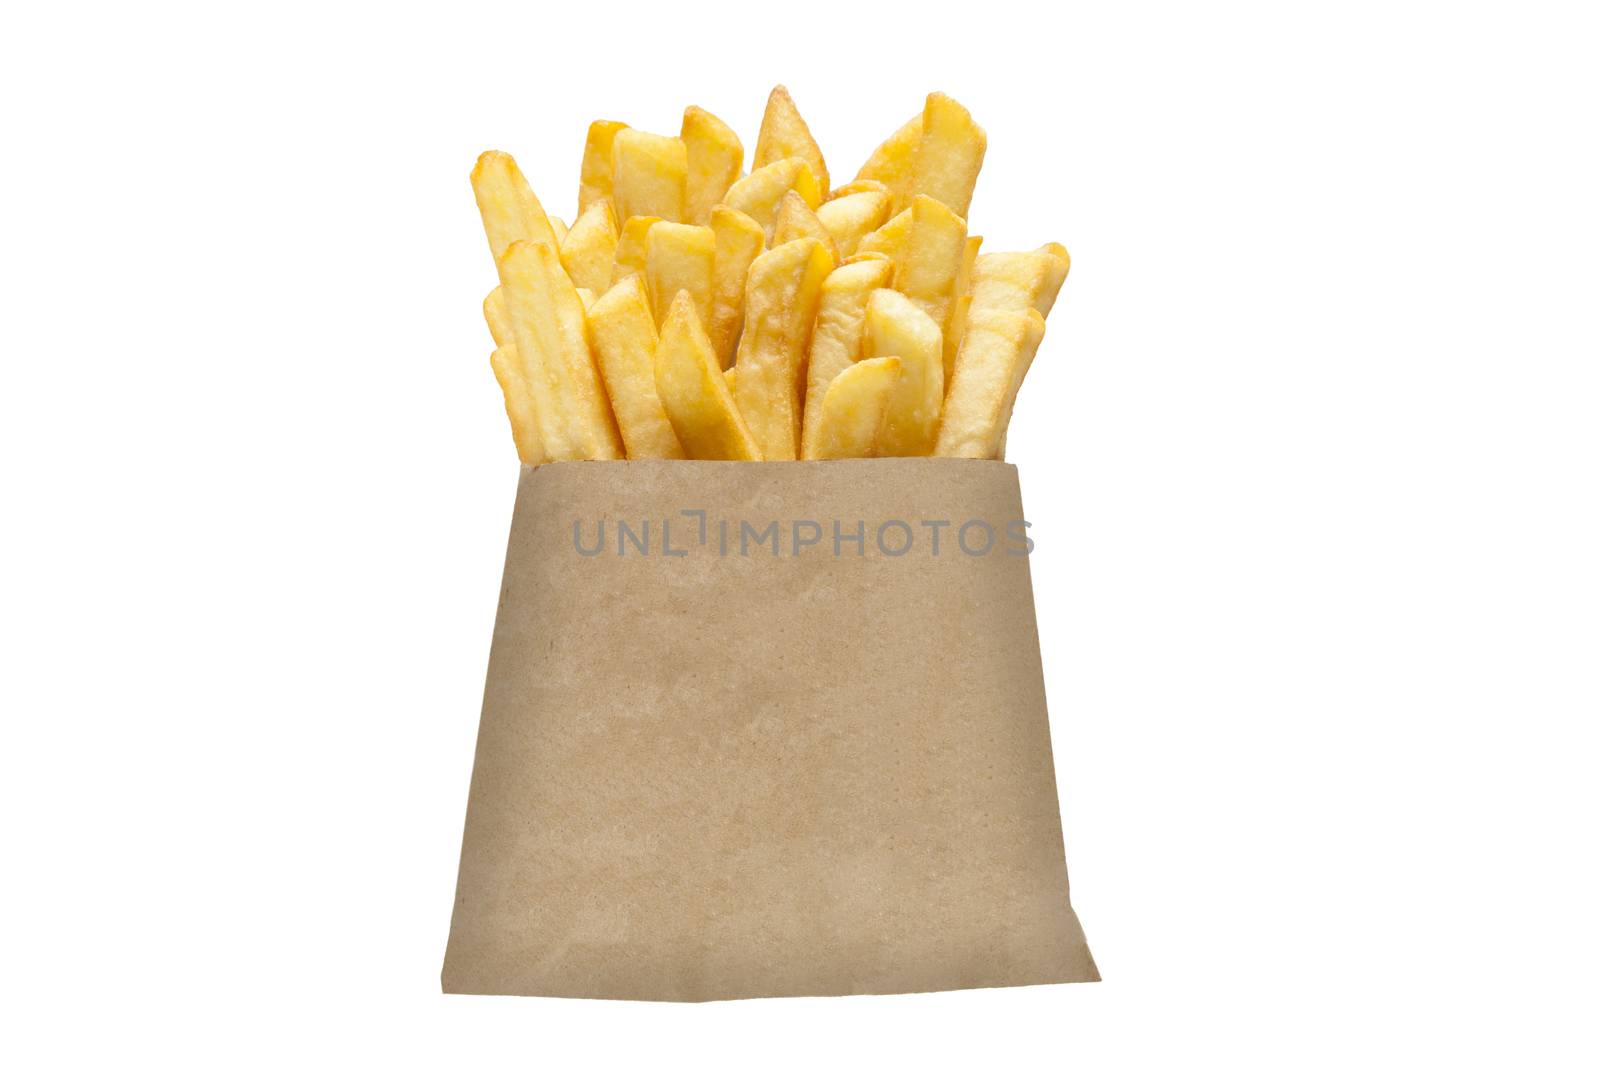 French fries in paper packaging